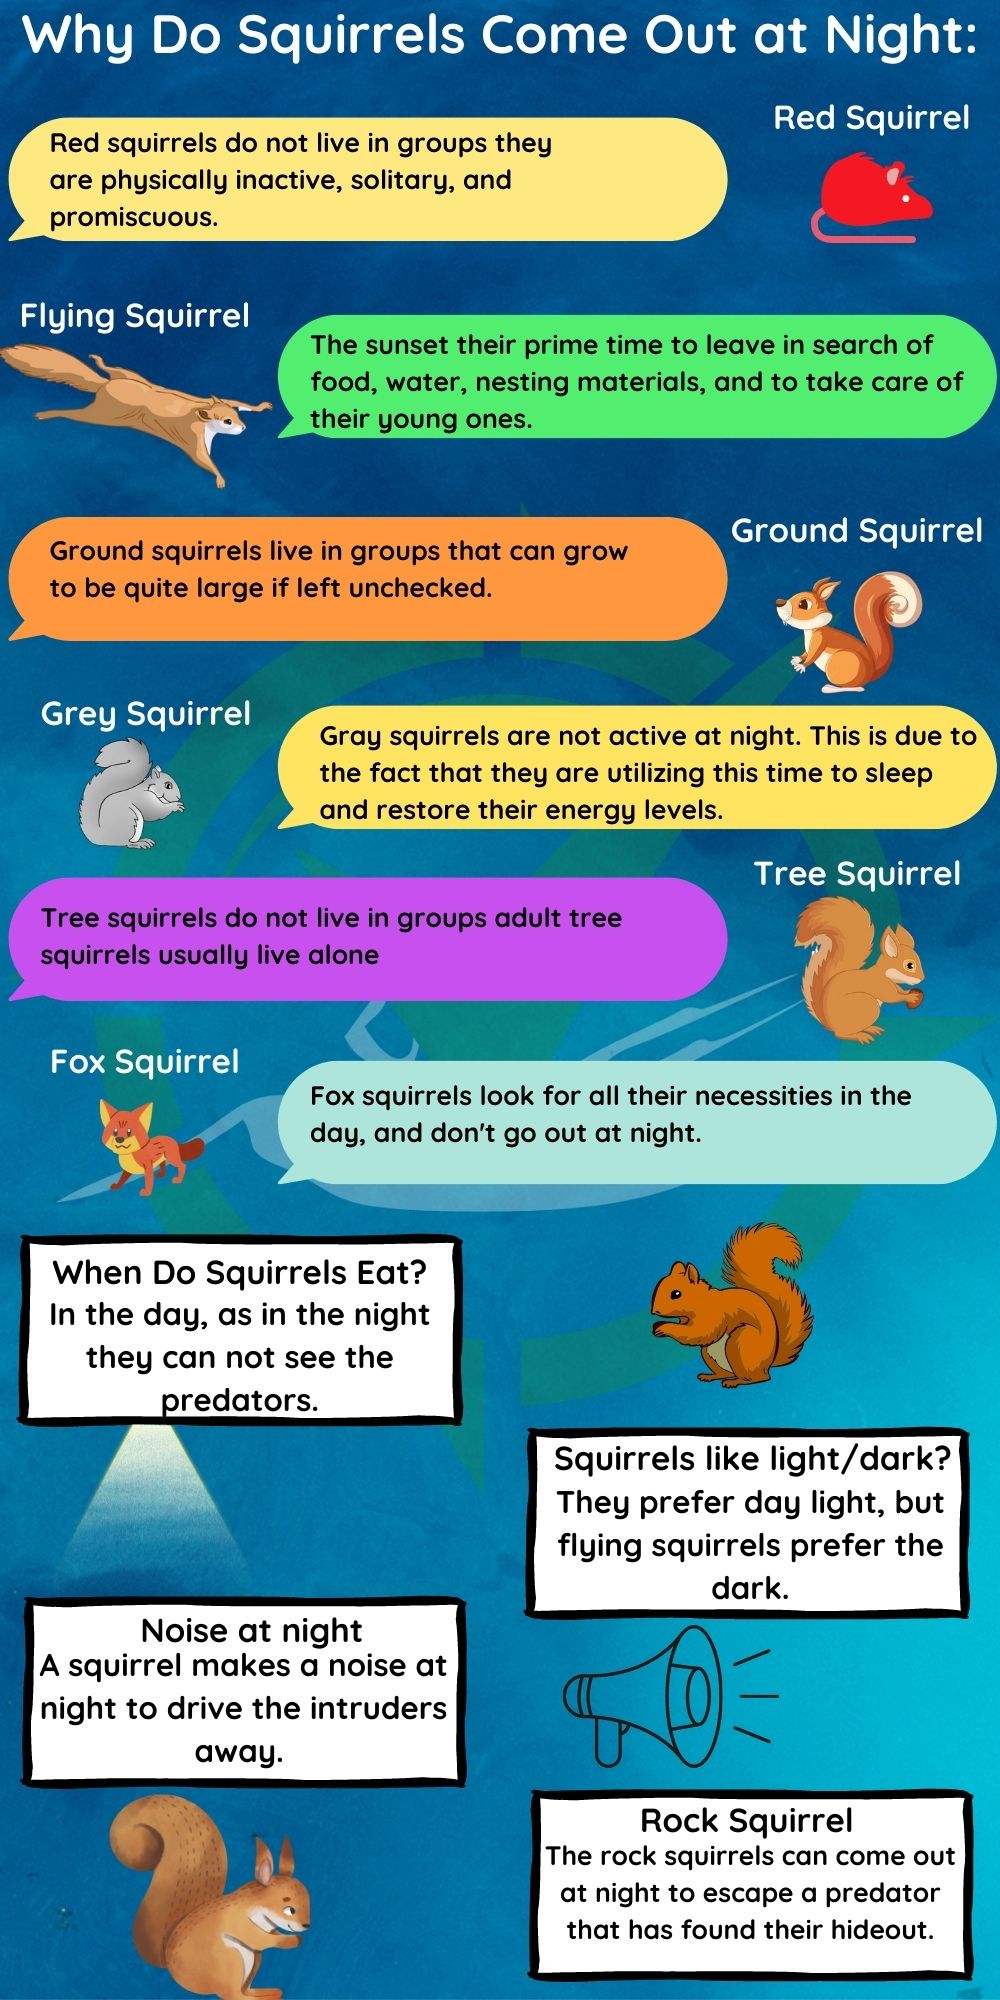 Why Do Squirrels Go Out At Night